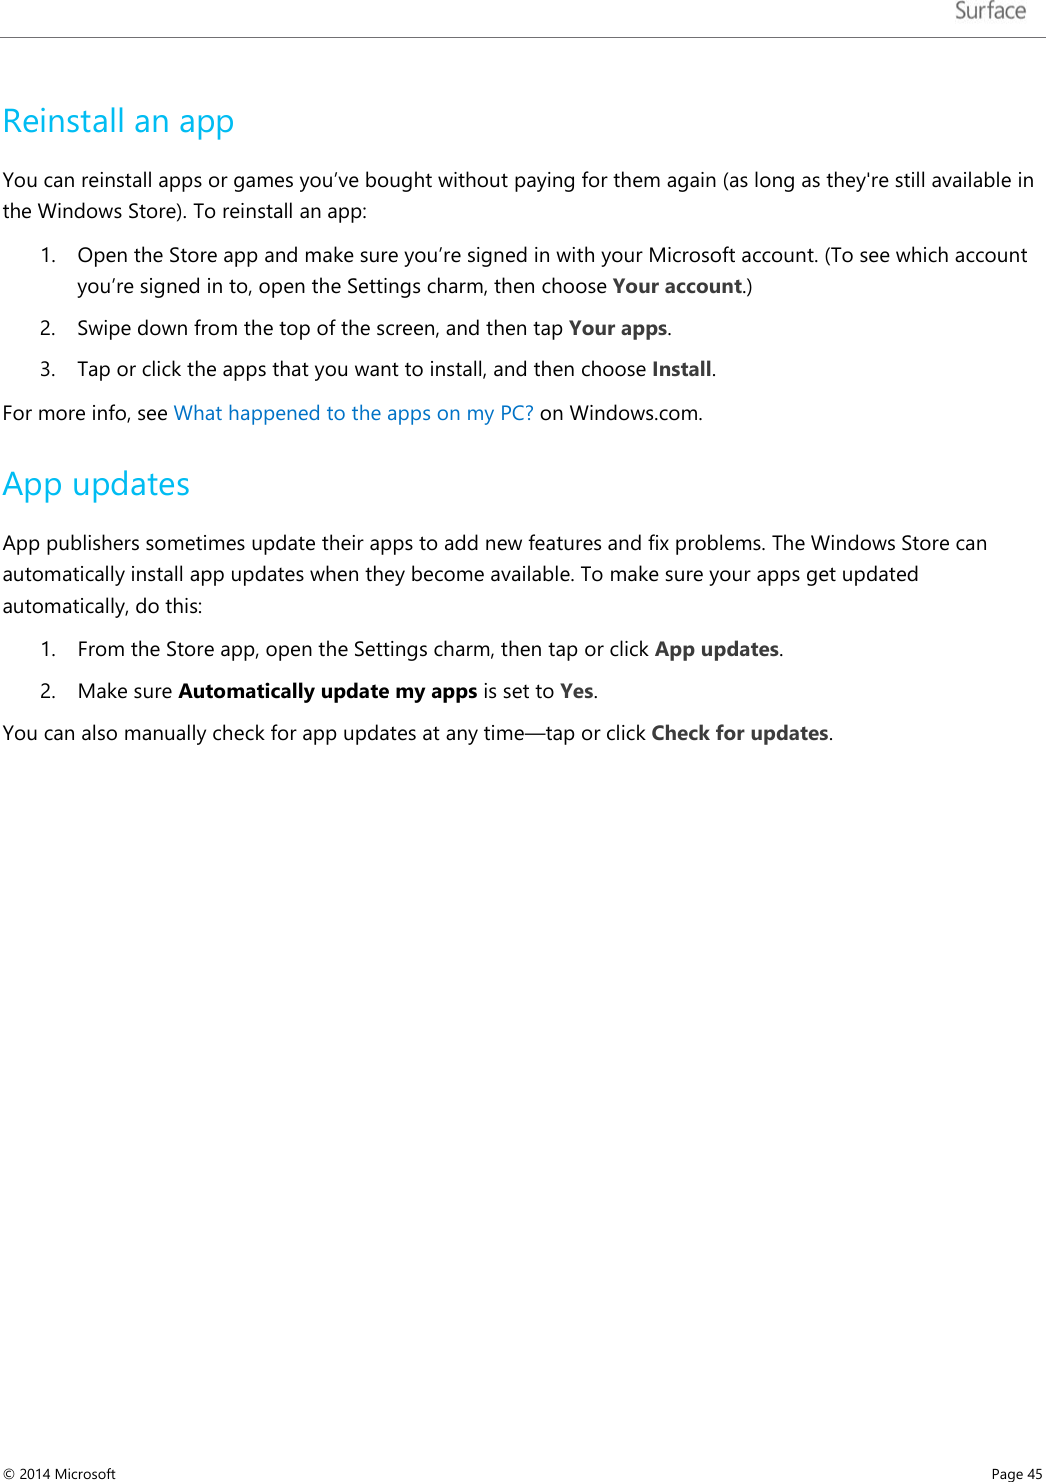   Reinstall an app You can reinstall apps or games you’ve bought without paying for them again (as long as they&apos;re still available in the Windows Store). To reinstall an app: 1. Open the Store app and make sure you’re signed in with your Microsoft account. (To see which account you’re signed in to, open the Settings charm, then choose Your account.) 2. Swipe down from the top of the screen, and then tap Your apps.  3. Tap or click the apps that you want to install, and then choose Install. For more info, see What happened to the apps on my PC? on Windows.com. App updates App publishers sometimes update their apps to add new features and fix problems. The Windows Store can automatically install app updates when they become available. To make sure your apps get updated automatically, do this: 1. From the Store app, open the Settings charm, then tap or click App updates. 2. Make sure Automatically update my apps is set to Yes.  You can also manually check for app updates at any time—tap or click Check for updates.    © 2014 Microsoft     Page 45  